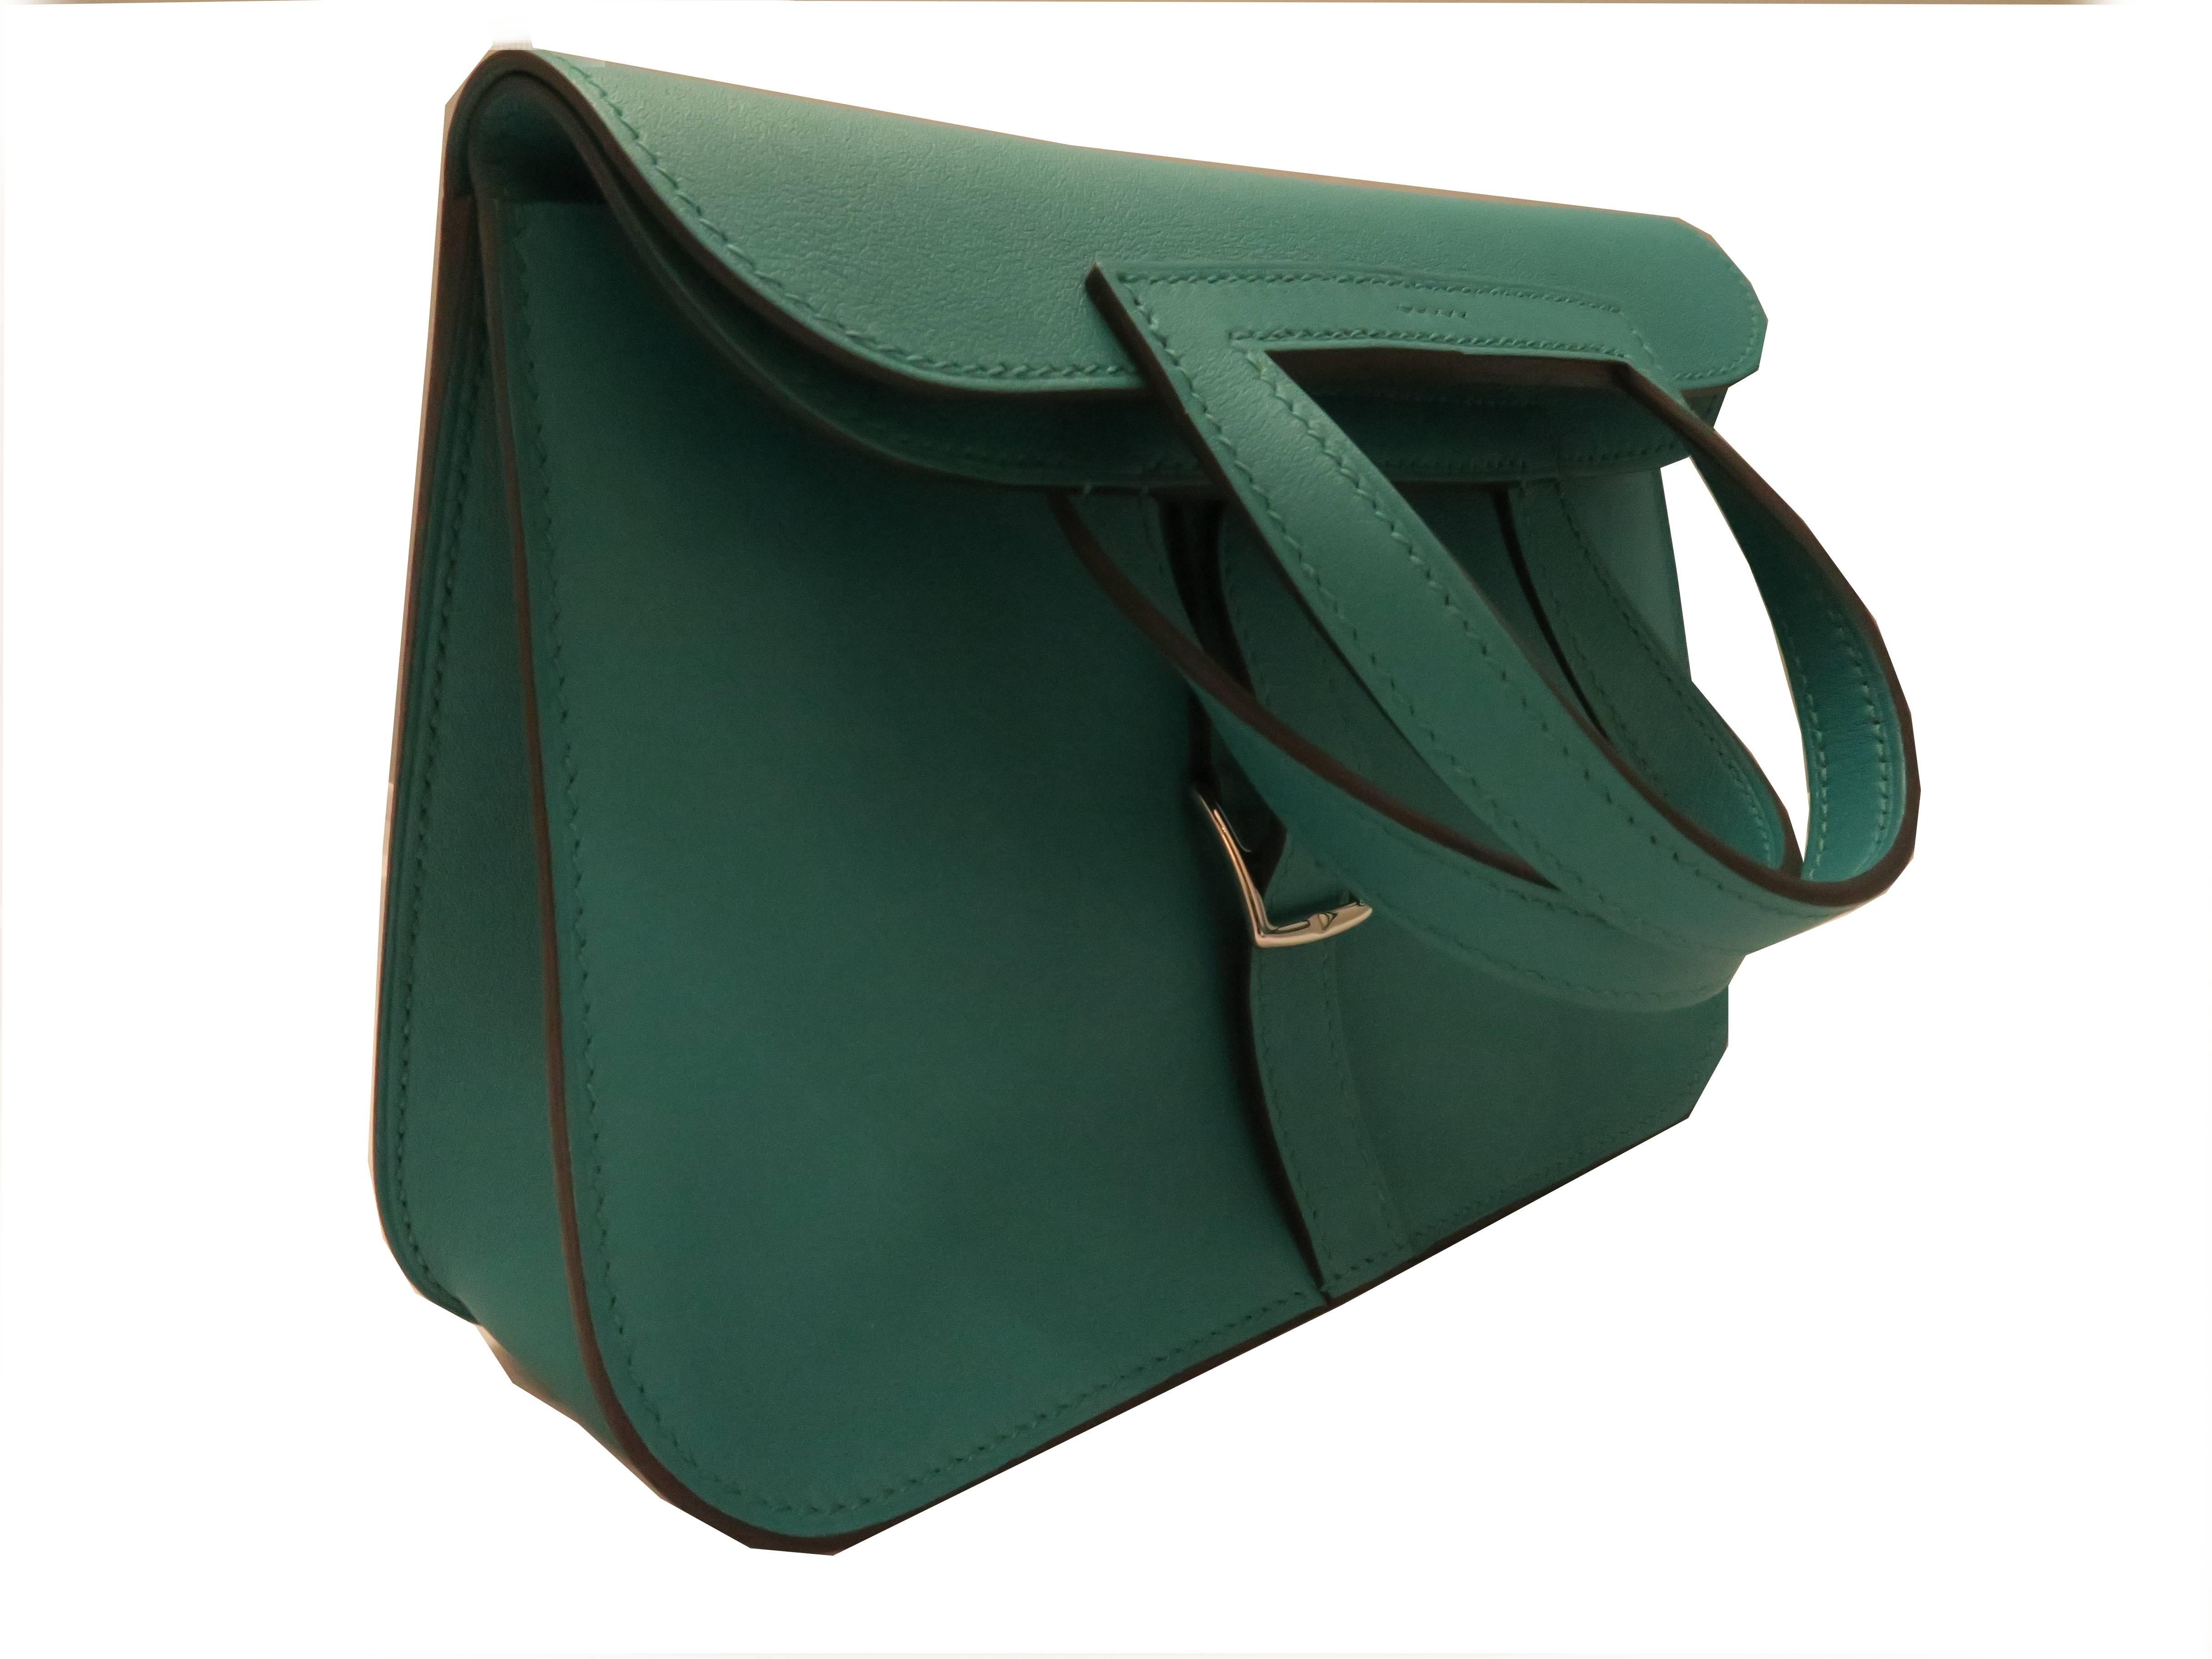 Color: Blue-Ish Green / Menthe ( Designer Color )

Material: Evercolor Leather

Condition: New 
Overall: Brand New, Not Used
Surface: Good
Corners: Good
Edges: Good
Handles/Straps: Good
Hardware: Good

Dimension: W22.5 × H15.5 × D7cm（W8.8" ×